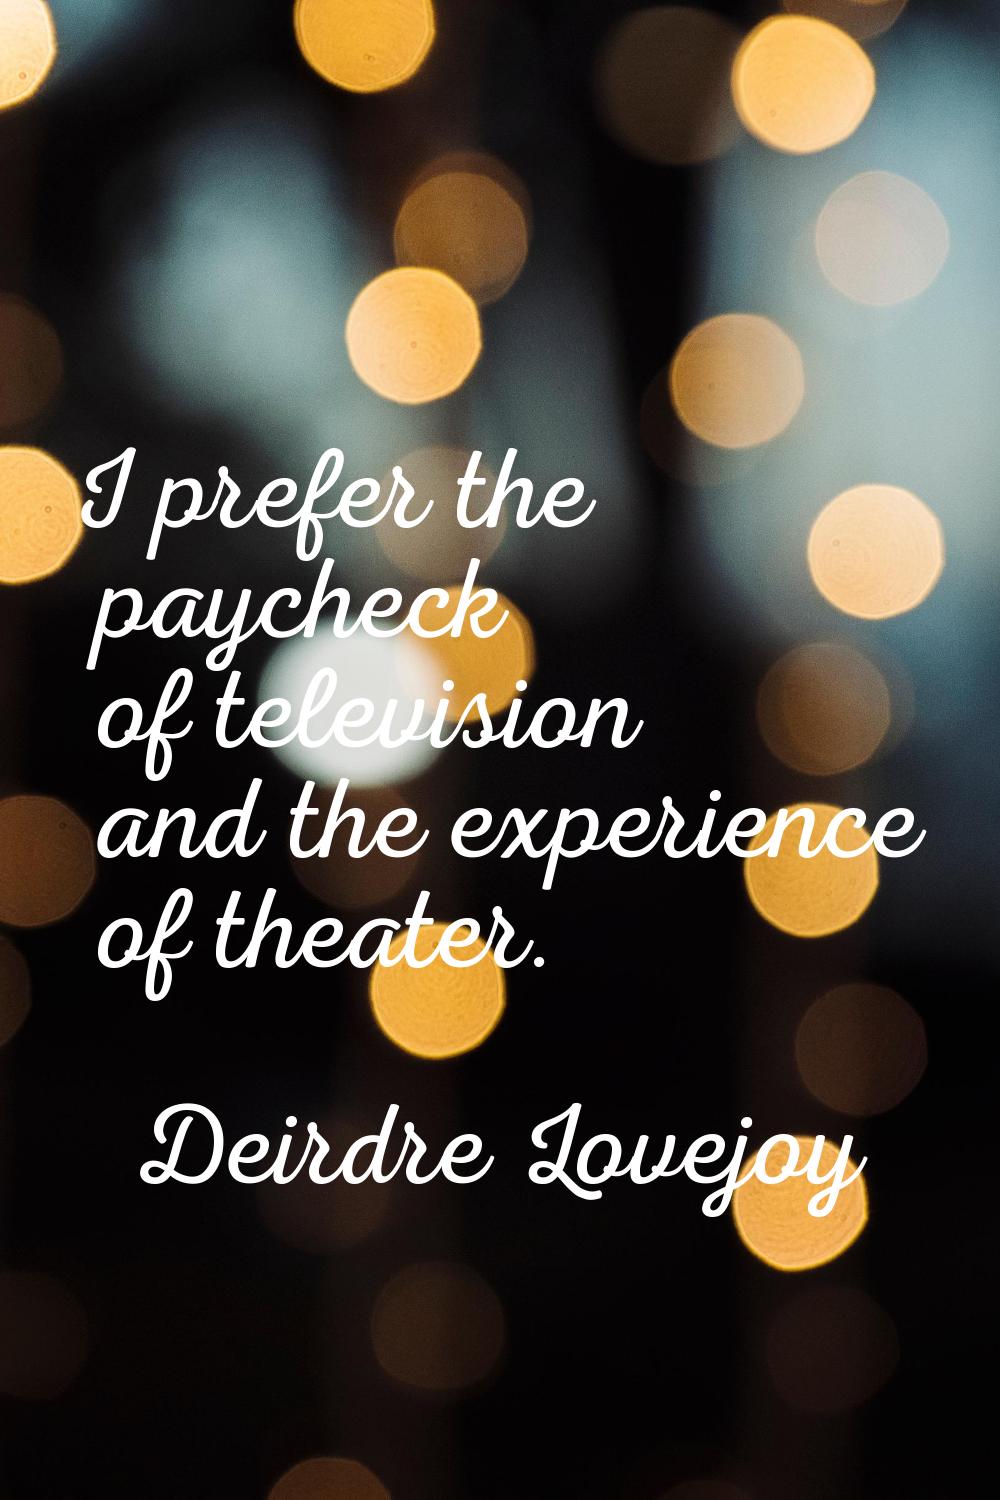 I prefer the paycheck of television and the experience of theater.